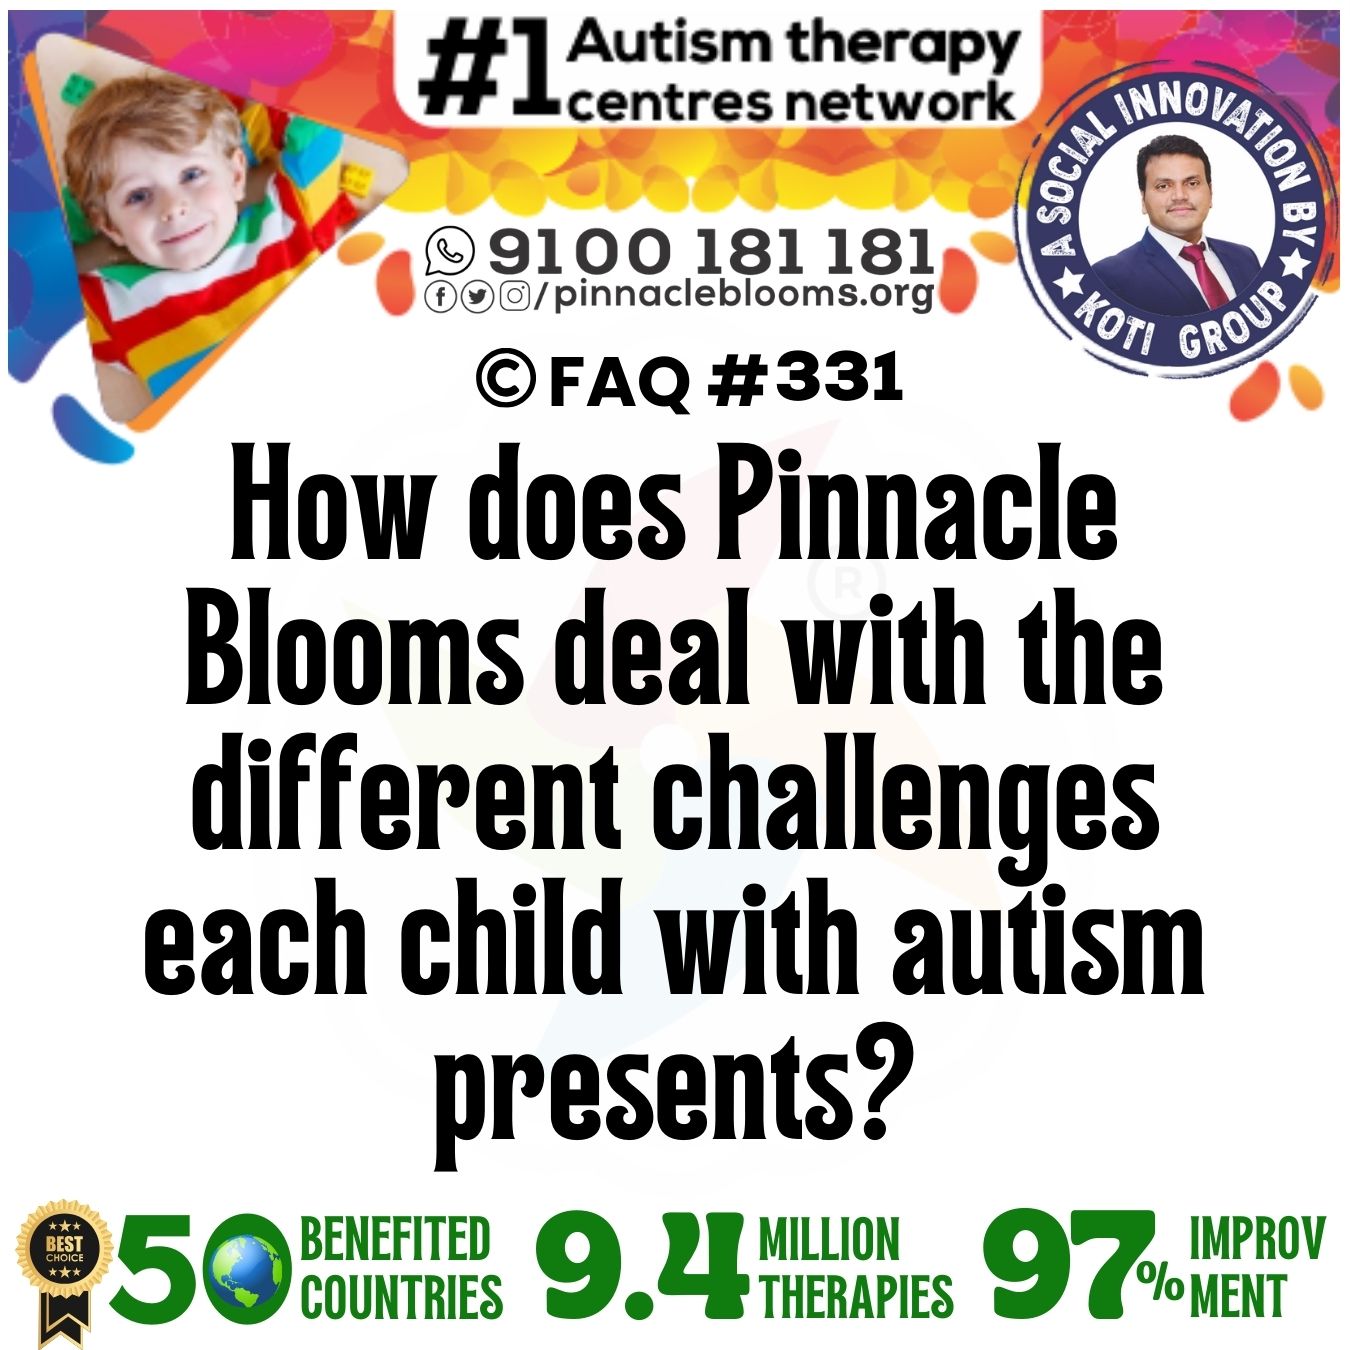 How does Pinnacle Blooms deal with the different challenges each child with autism presents?